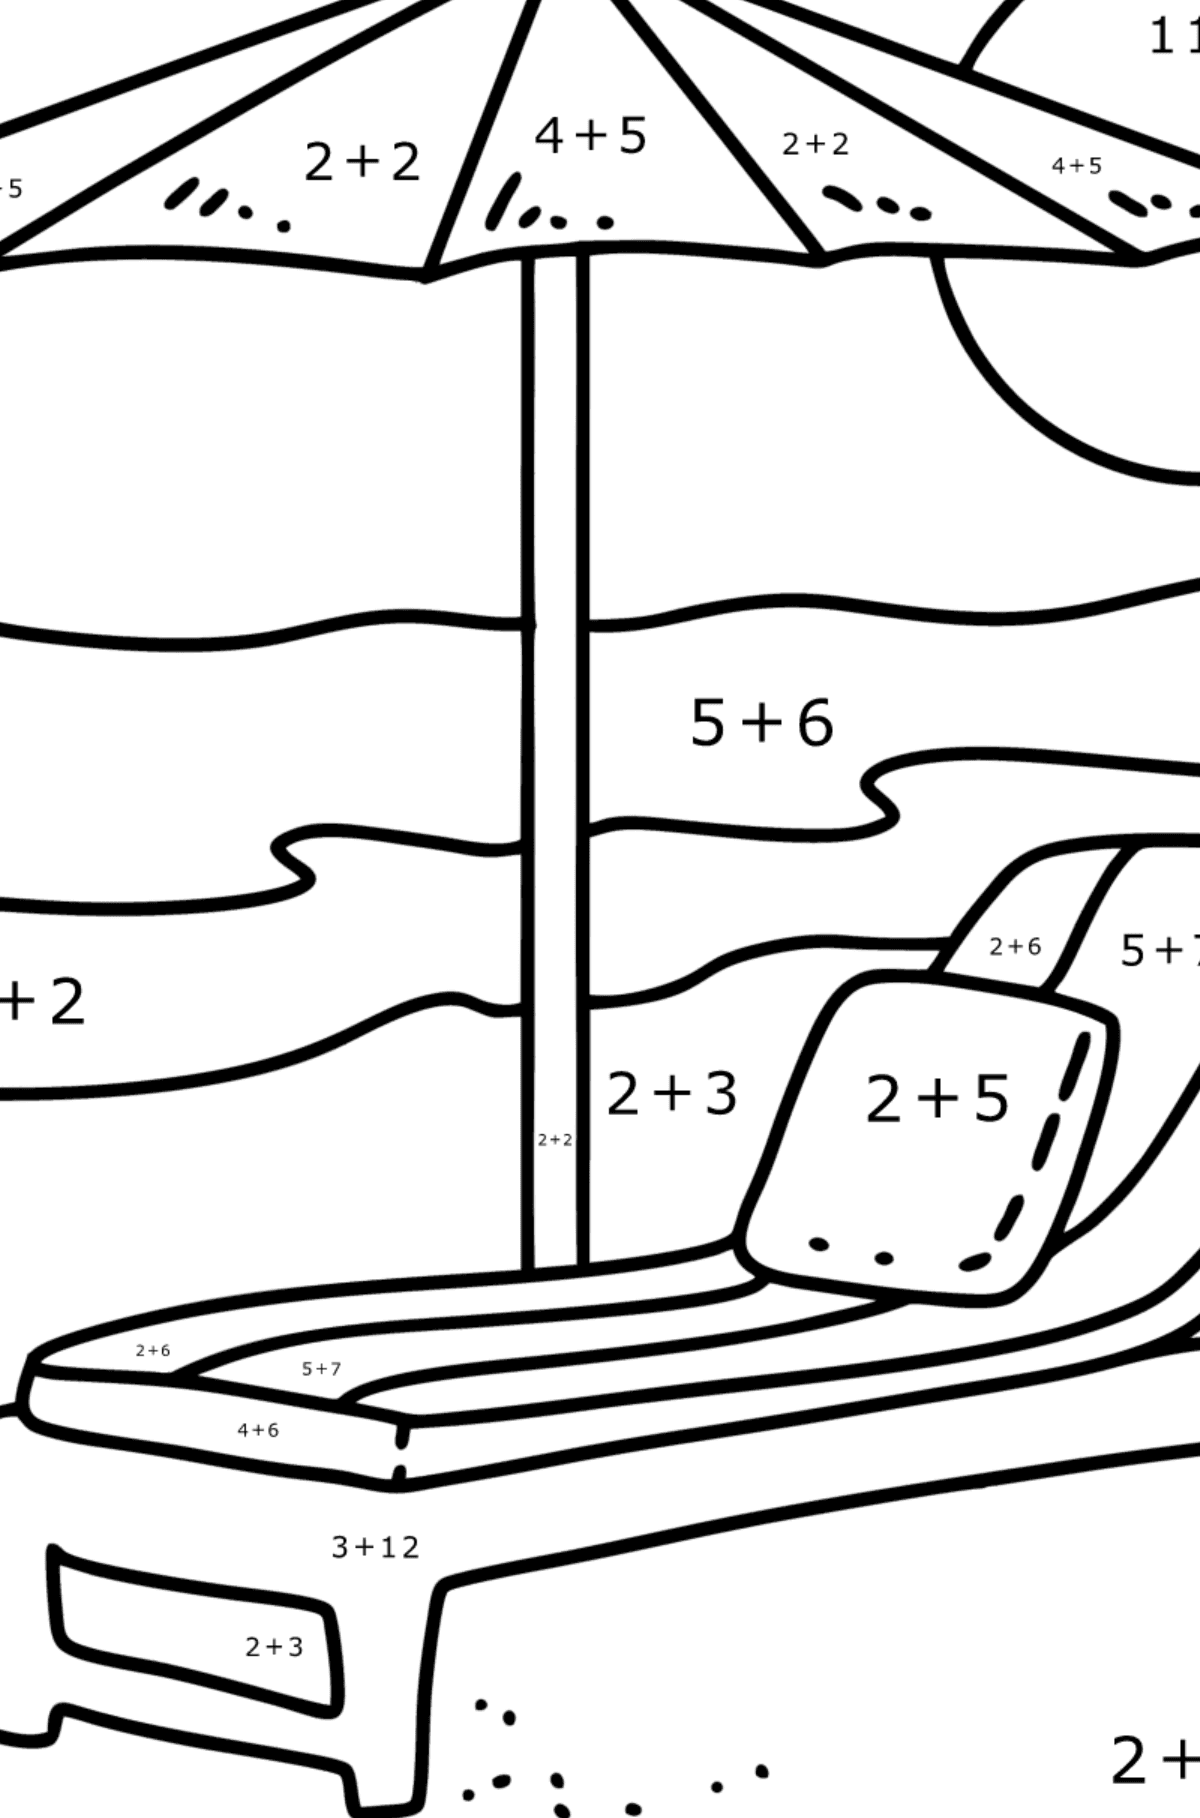 Summer Coloring page - Beach umbrella and Sun lounger - Math Coloring - Addition for Kids